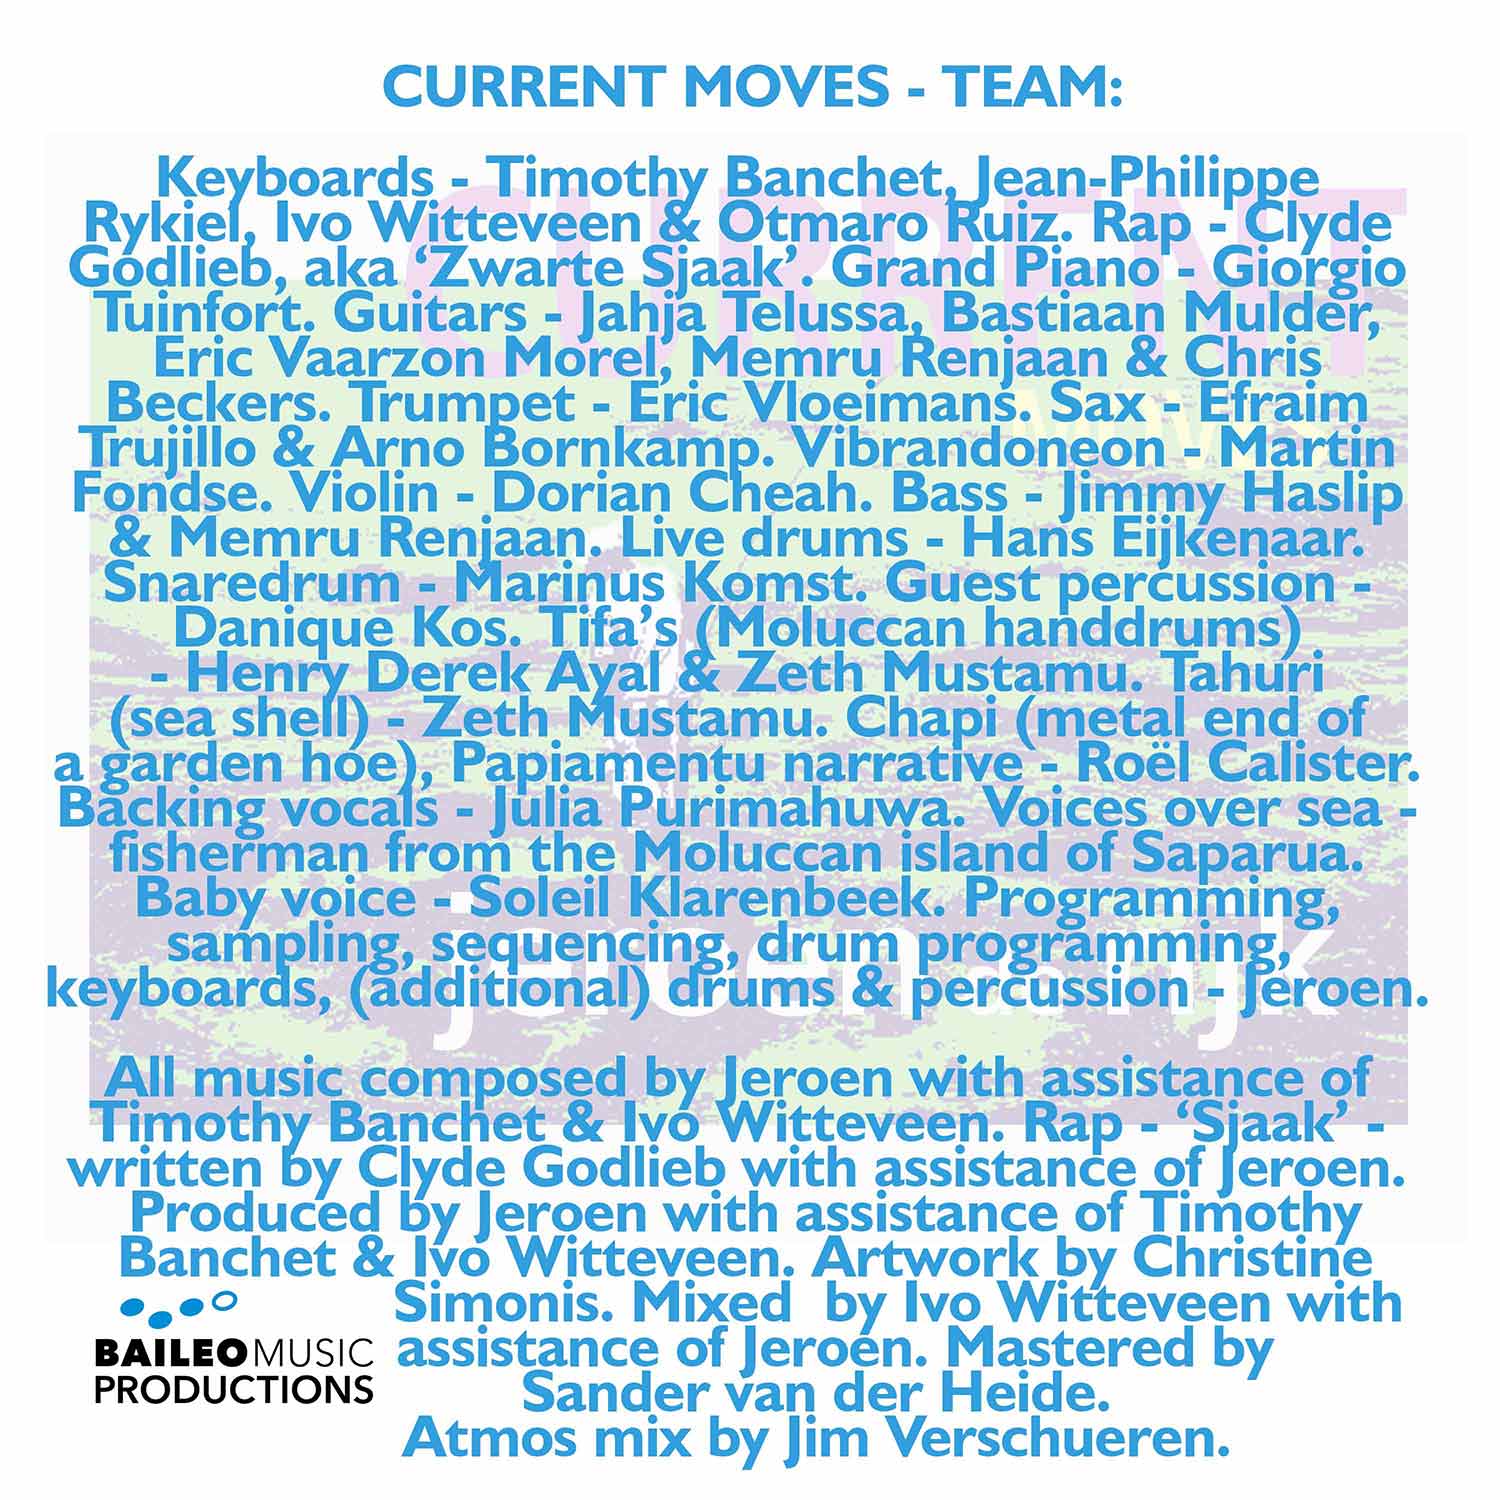 Current Moves - The Team